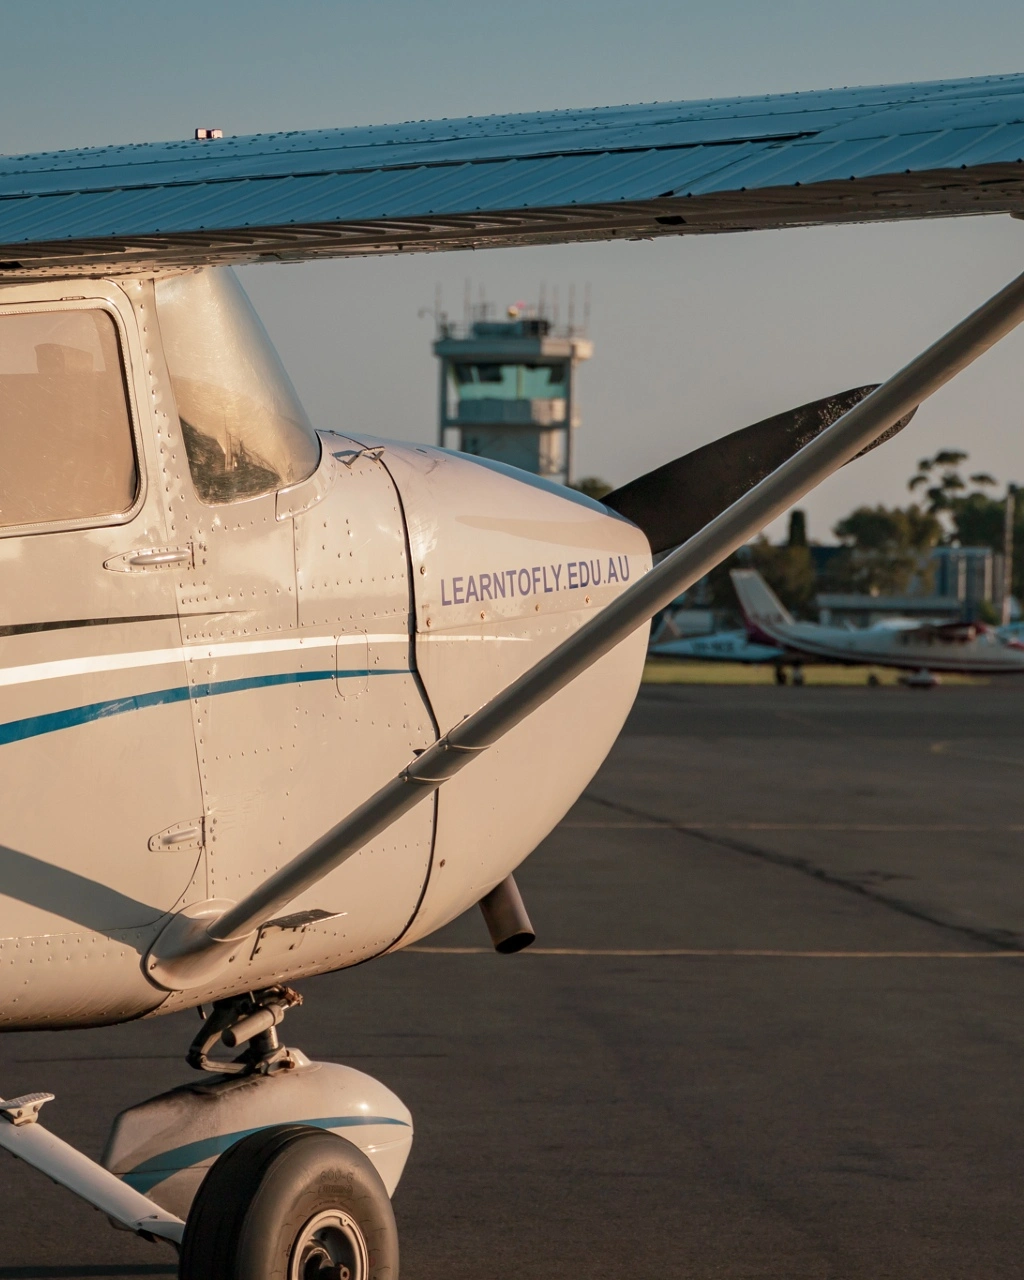 Recreational-Pilot-Licence-RPL-Theory-Learn-To-Fly-Melbourne-Cessna-172